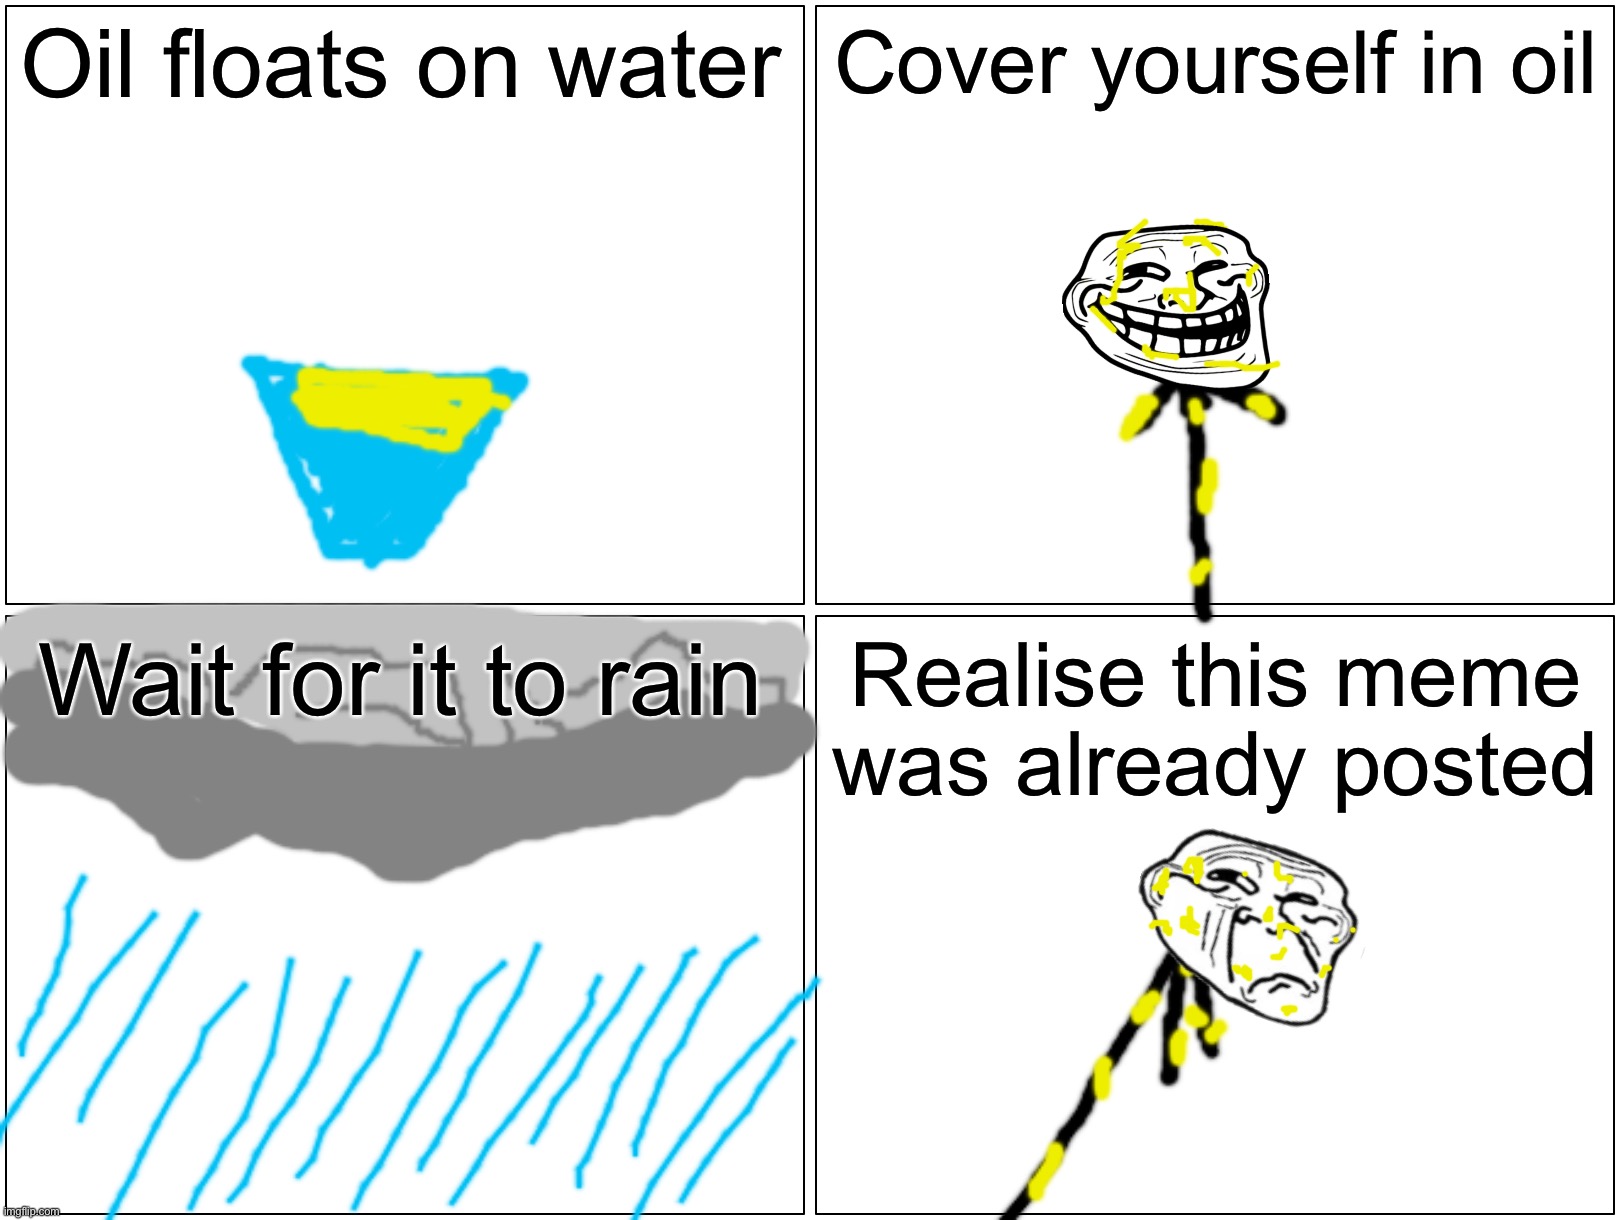 Blank Comic Panel 2x2 Meme |  Oil floats on water; Cover yourself in oil; Wait for it to rain; Realise this meme was already posted | image tagged in memes,blank comic panel 2x2,funny,funny memes,dank memes,troll | made w/ Imgflip meme maker